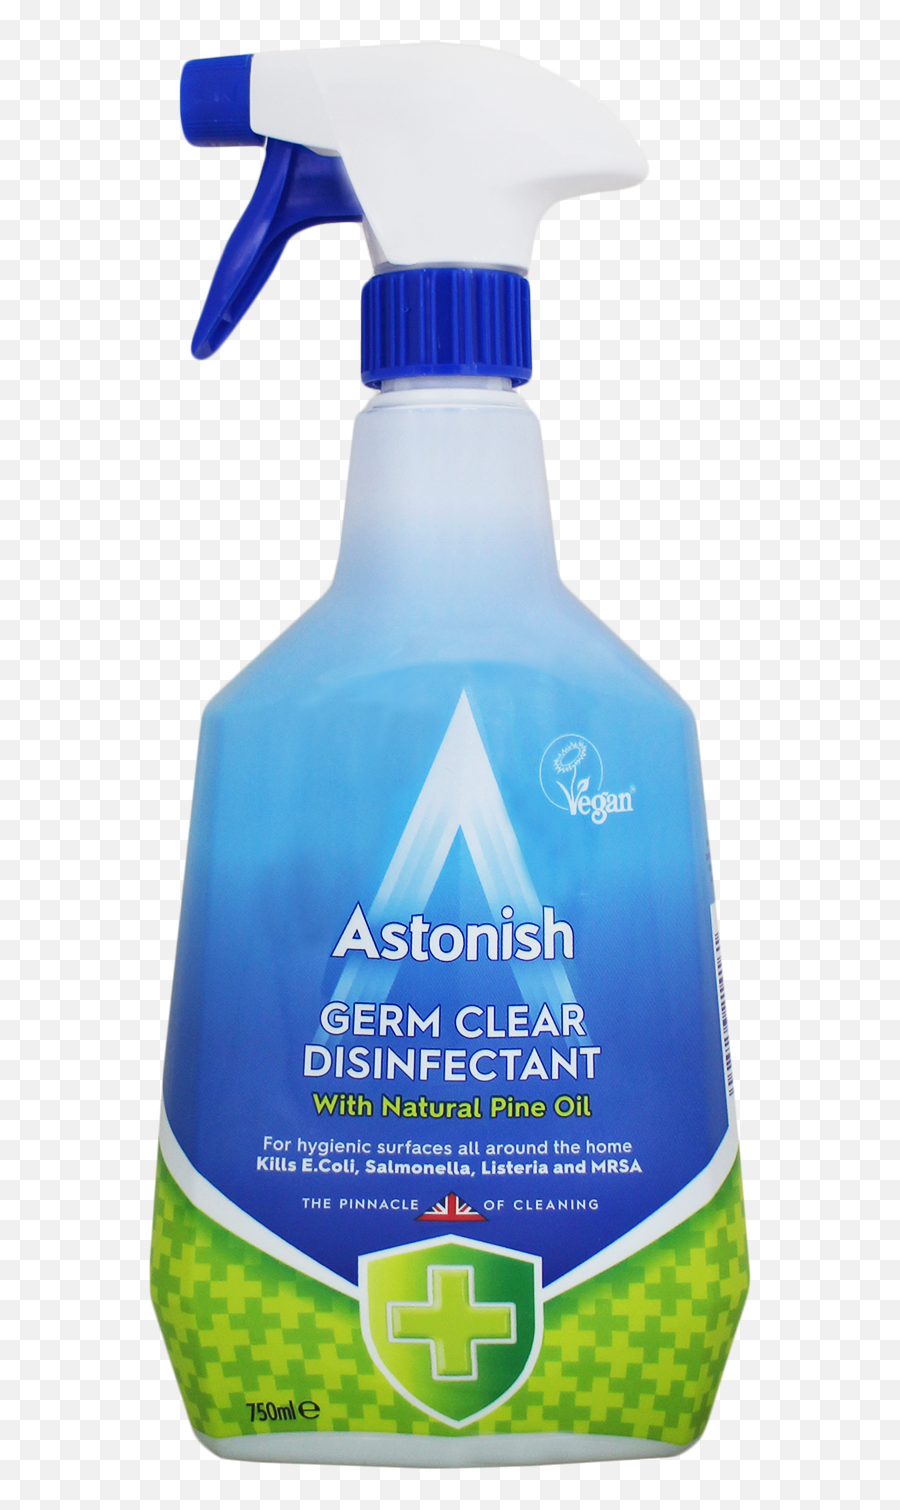 Astonish Germ Clear 4in1 Disinfectant - Astonish Germ Clear Disinfectant Emoji,Germ Emoji